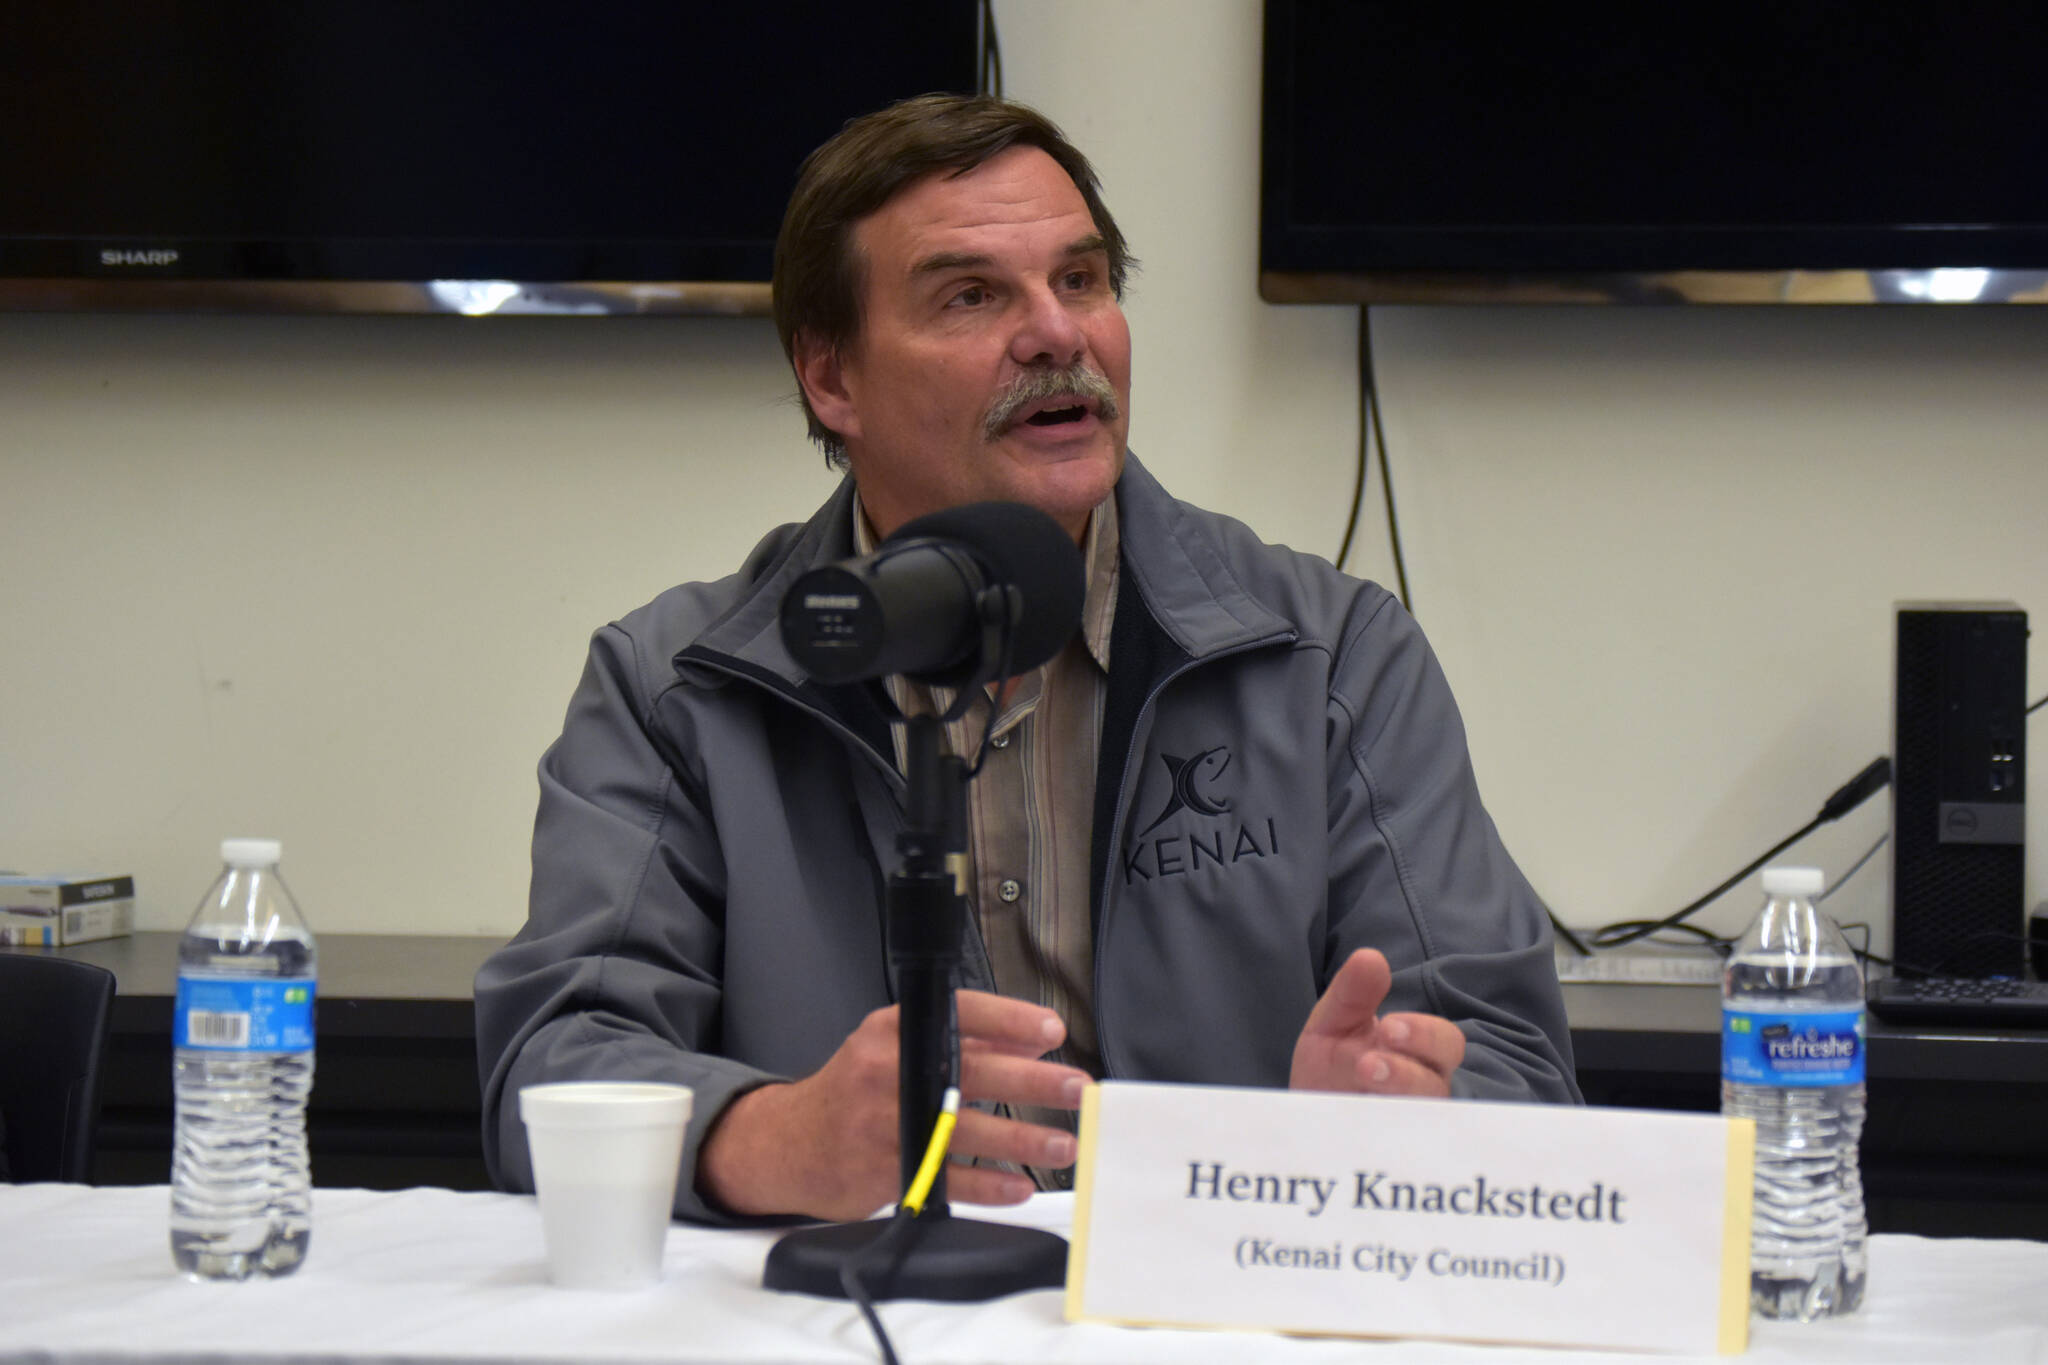 Henry Knackstedt participates in a Kenai City Council candidate forum at the Kenai Community Library in Kenai, Alaska, on Thursday, Sept. 7, 2023. (Jake Dye/Peninsula Clarion)